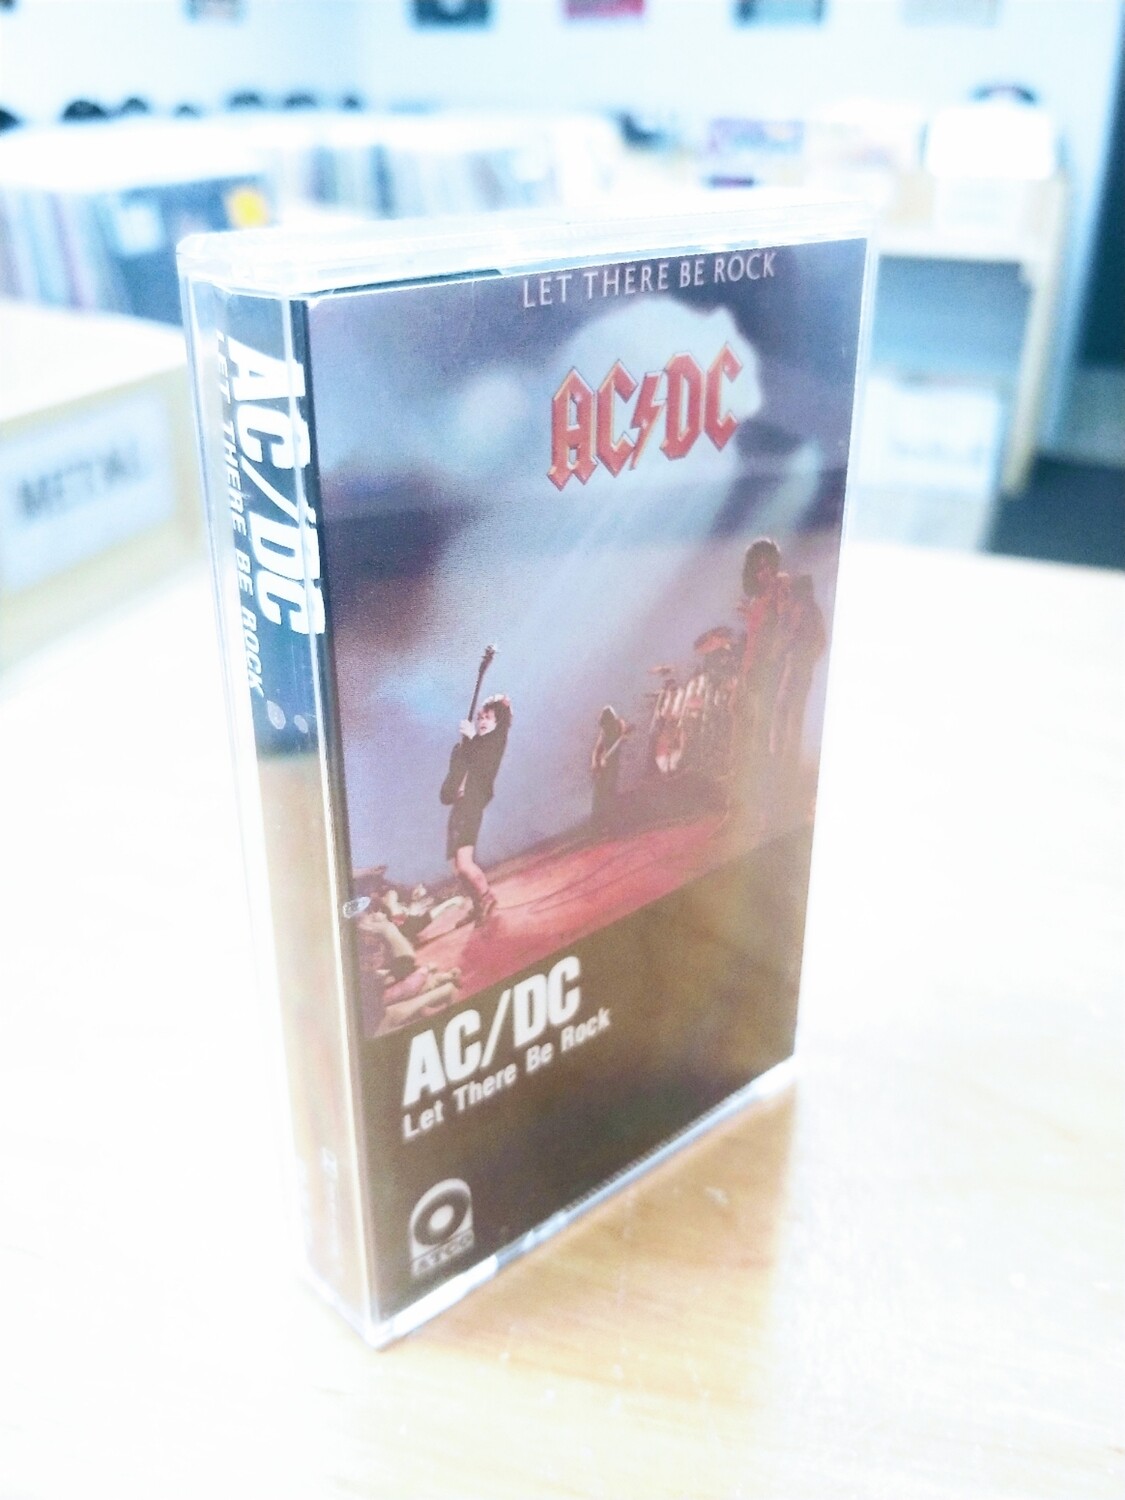 ACDC - Let there be rock (CASSETTE)